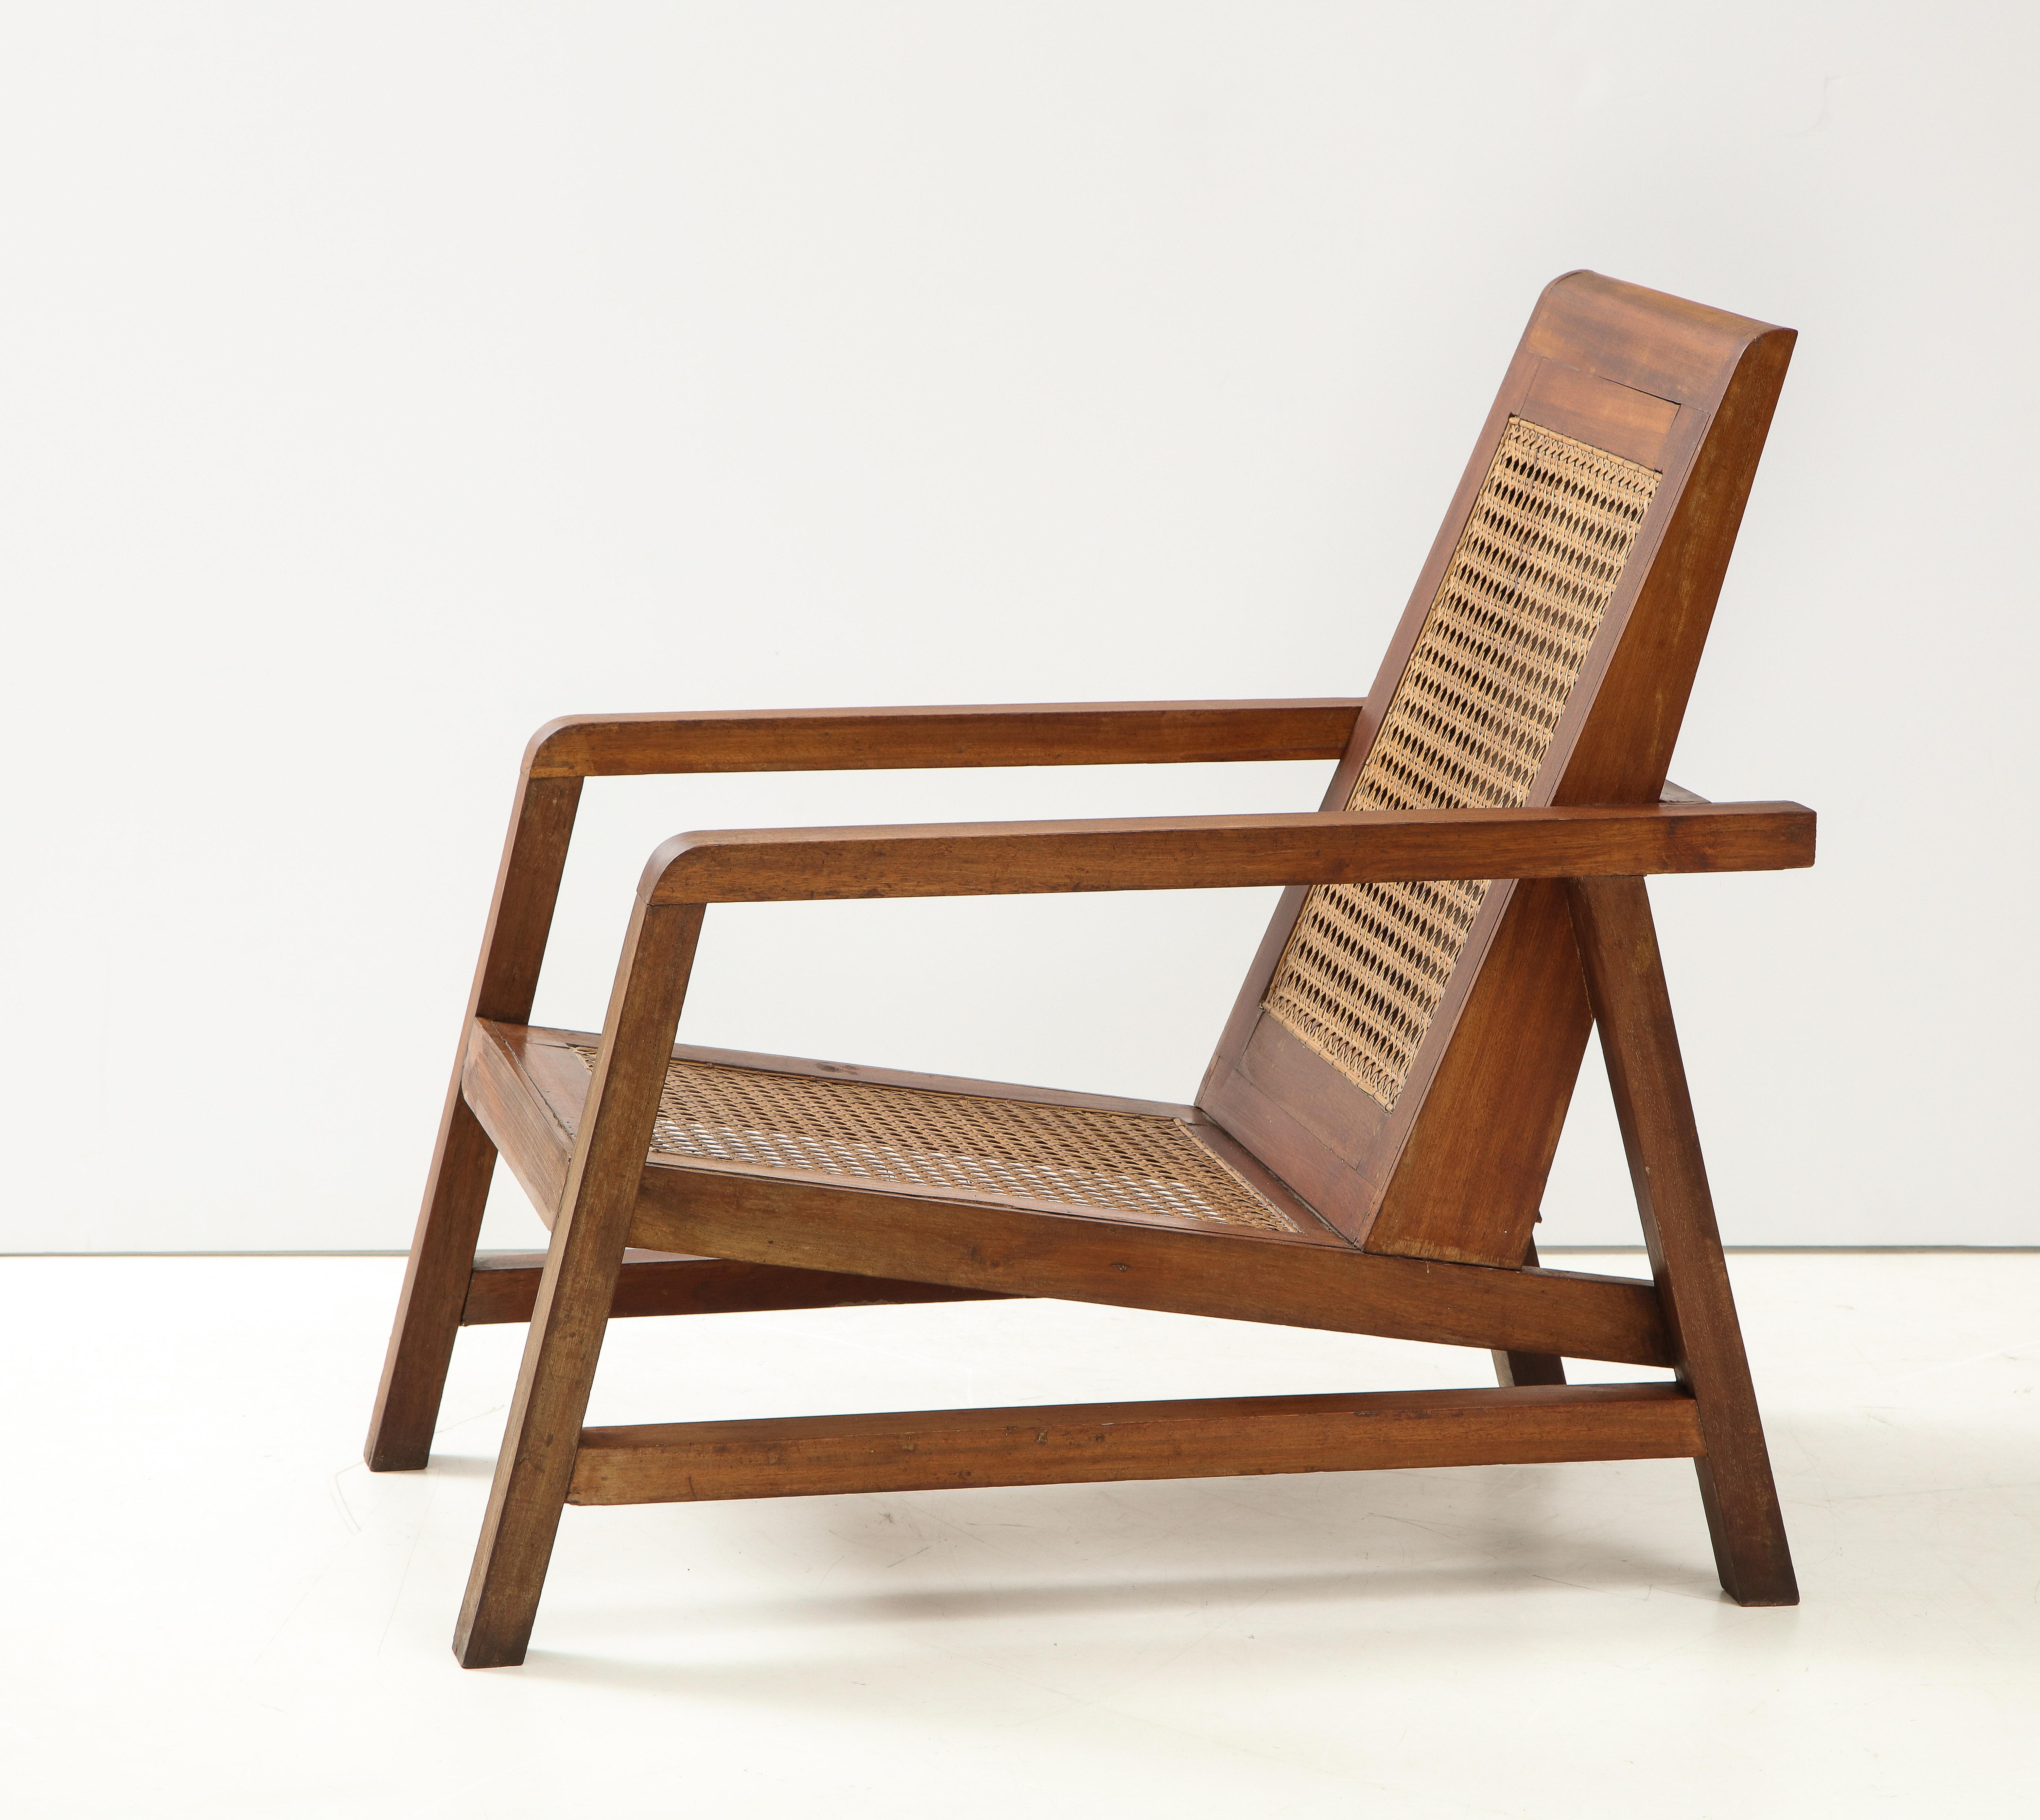 French Pair of Modernist Period Pierre Jeanneret Style Chairs, France, c. 1950